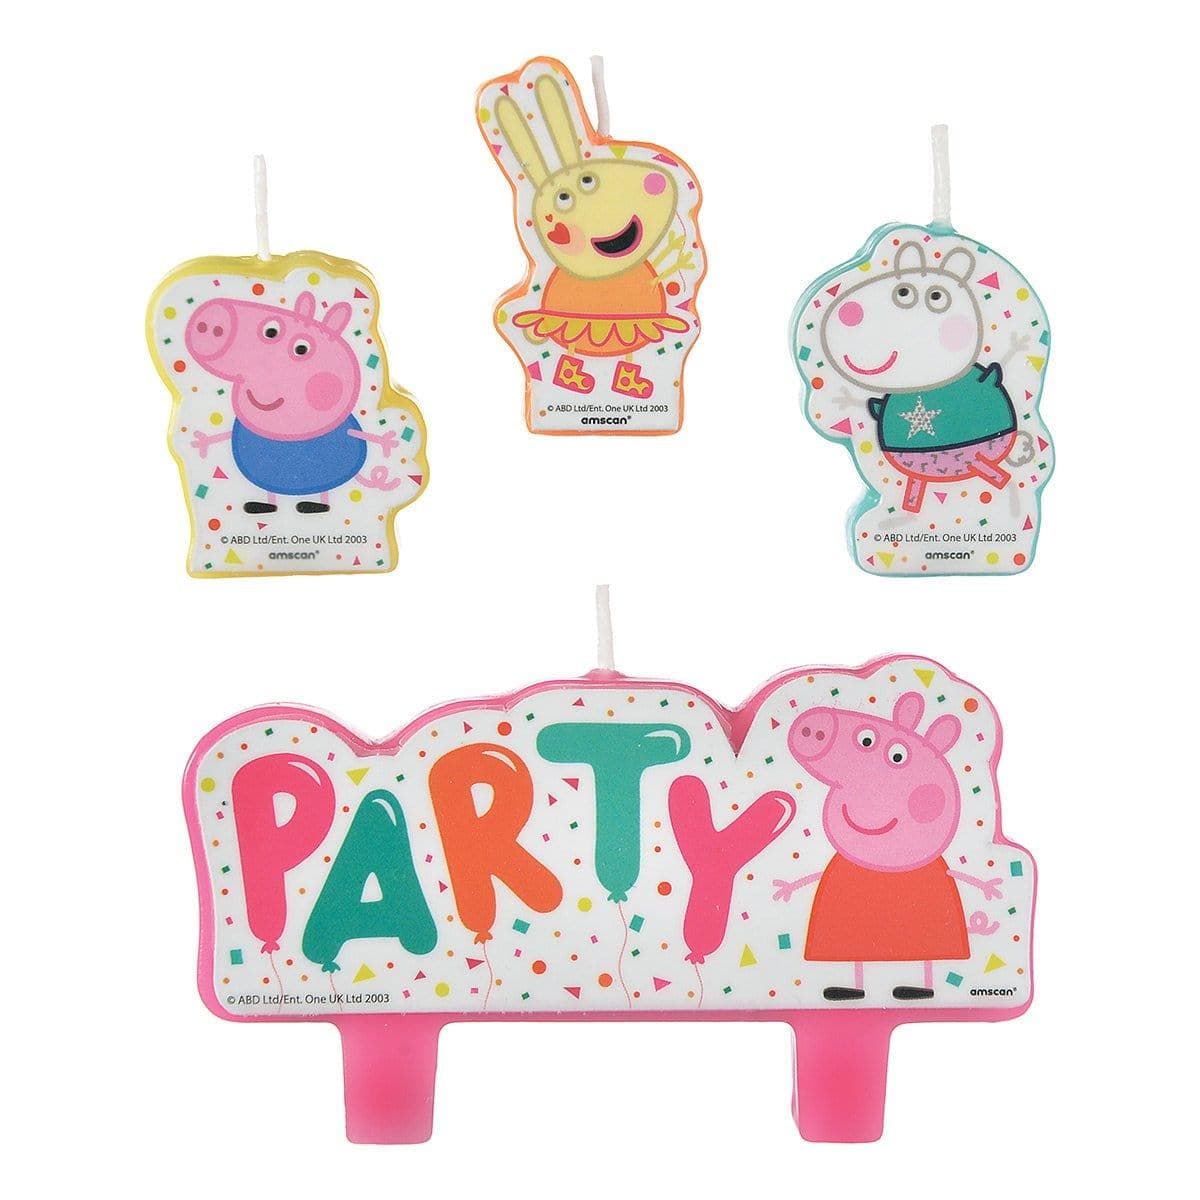 Buy Kids Birthday Peppa Pig Confetti Candles, 4 Counts sold at Party Expert